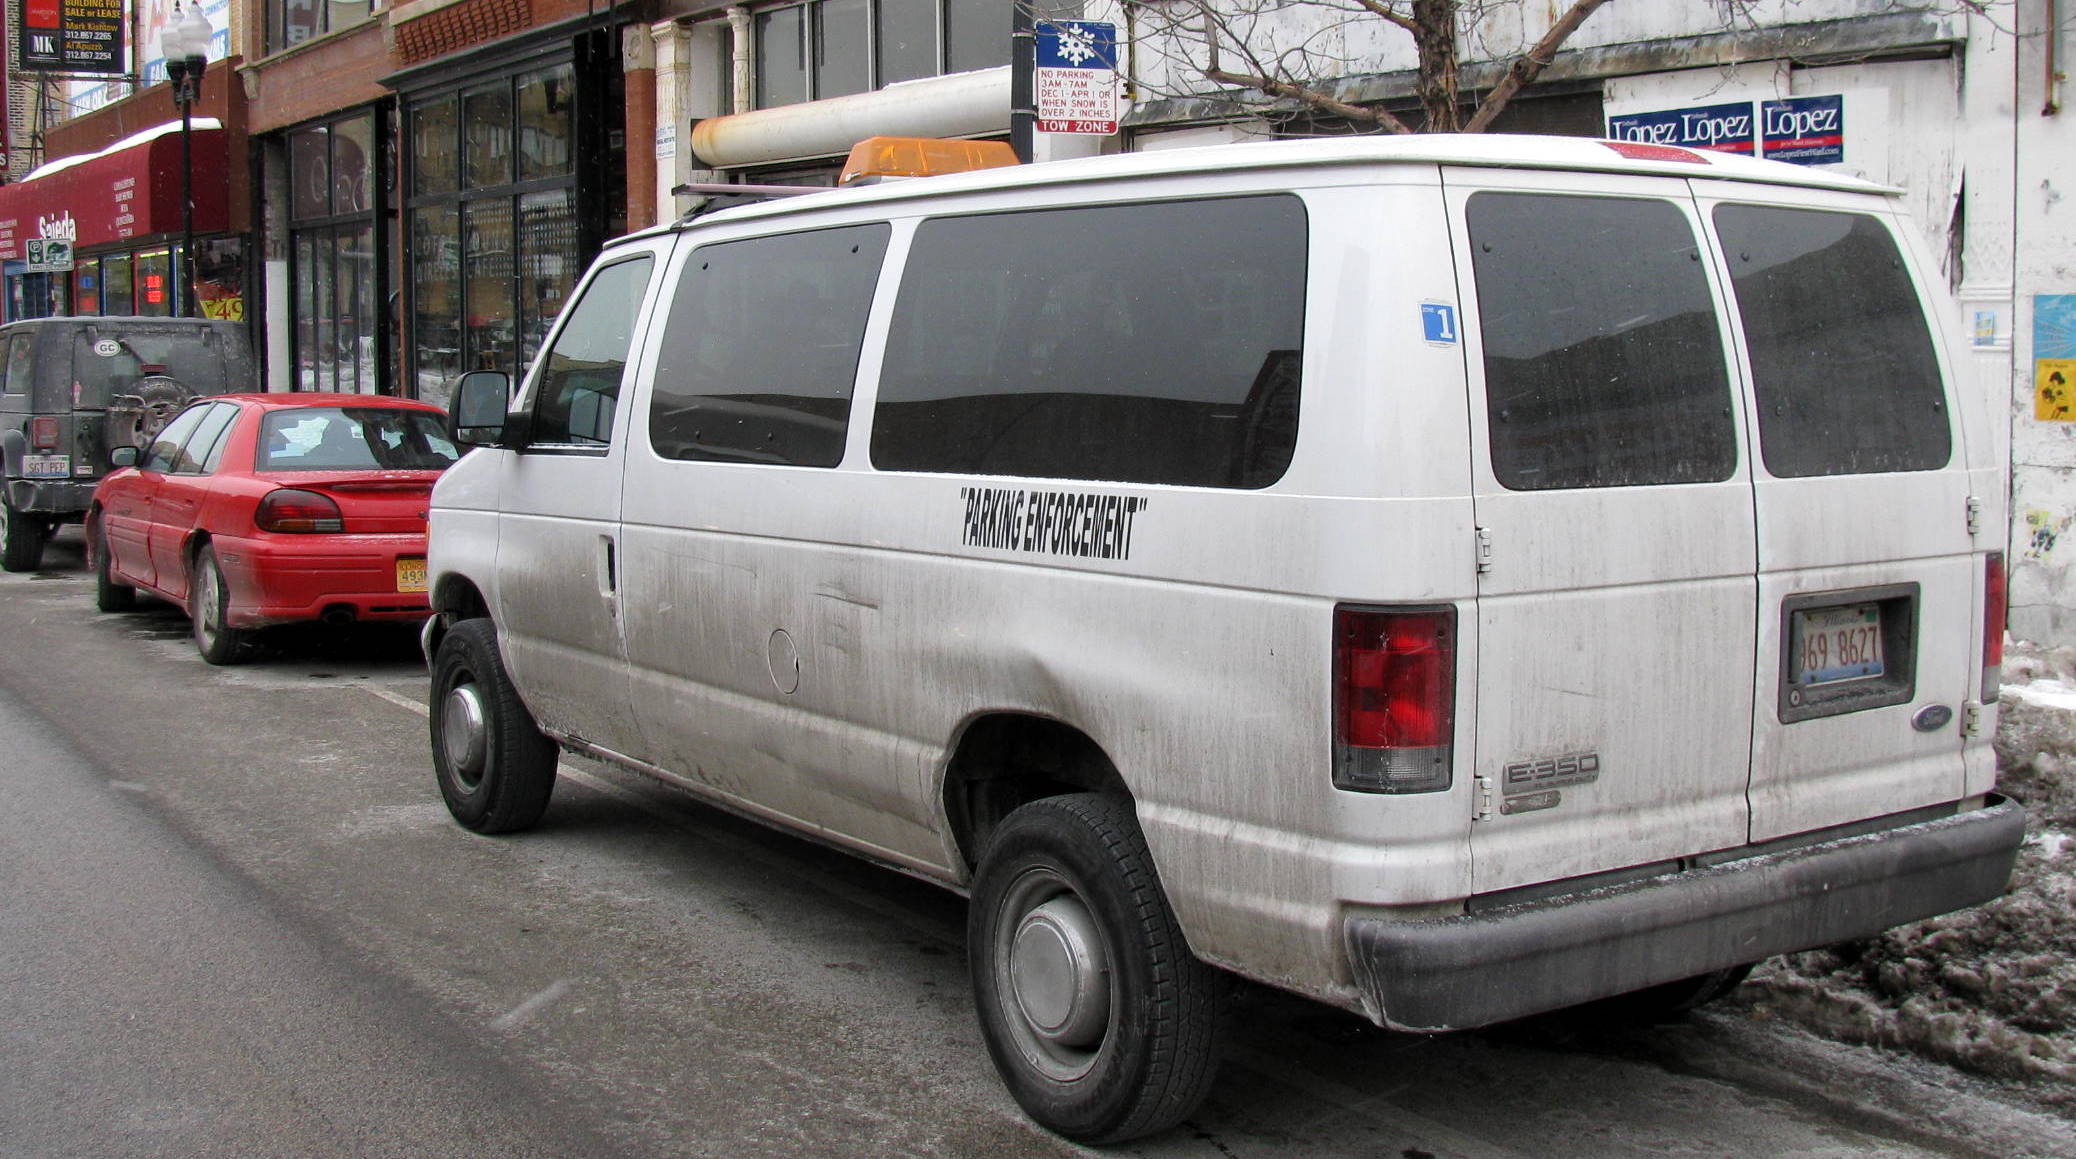 Ohio Man Arrested For Trying To Have Sex With A Van | The Urban Twist